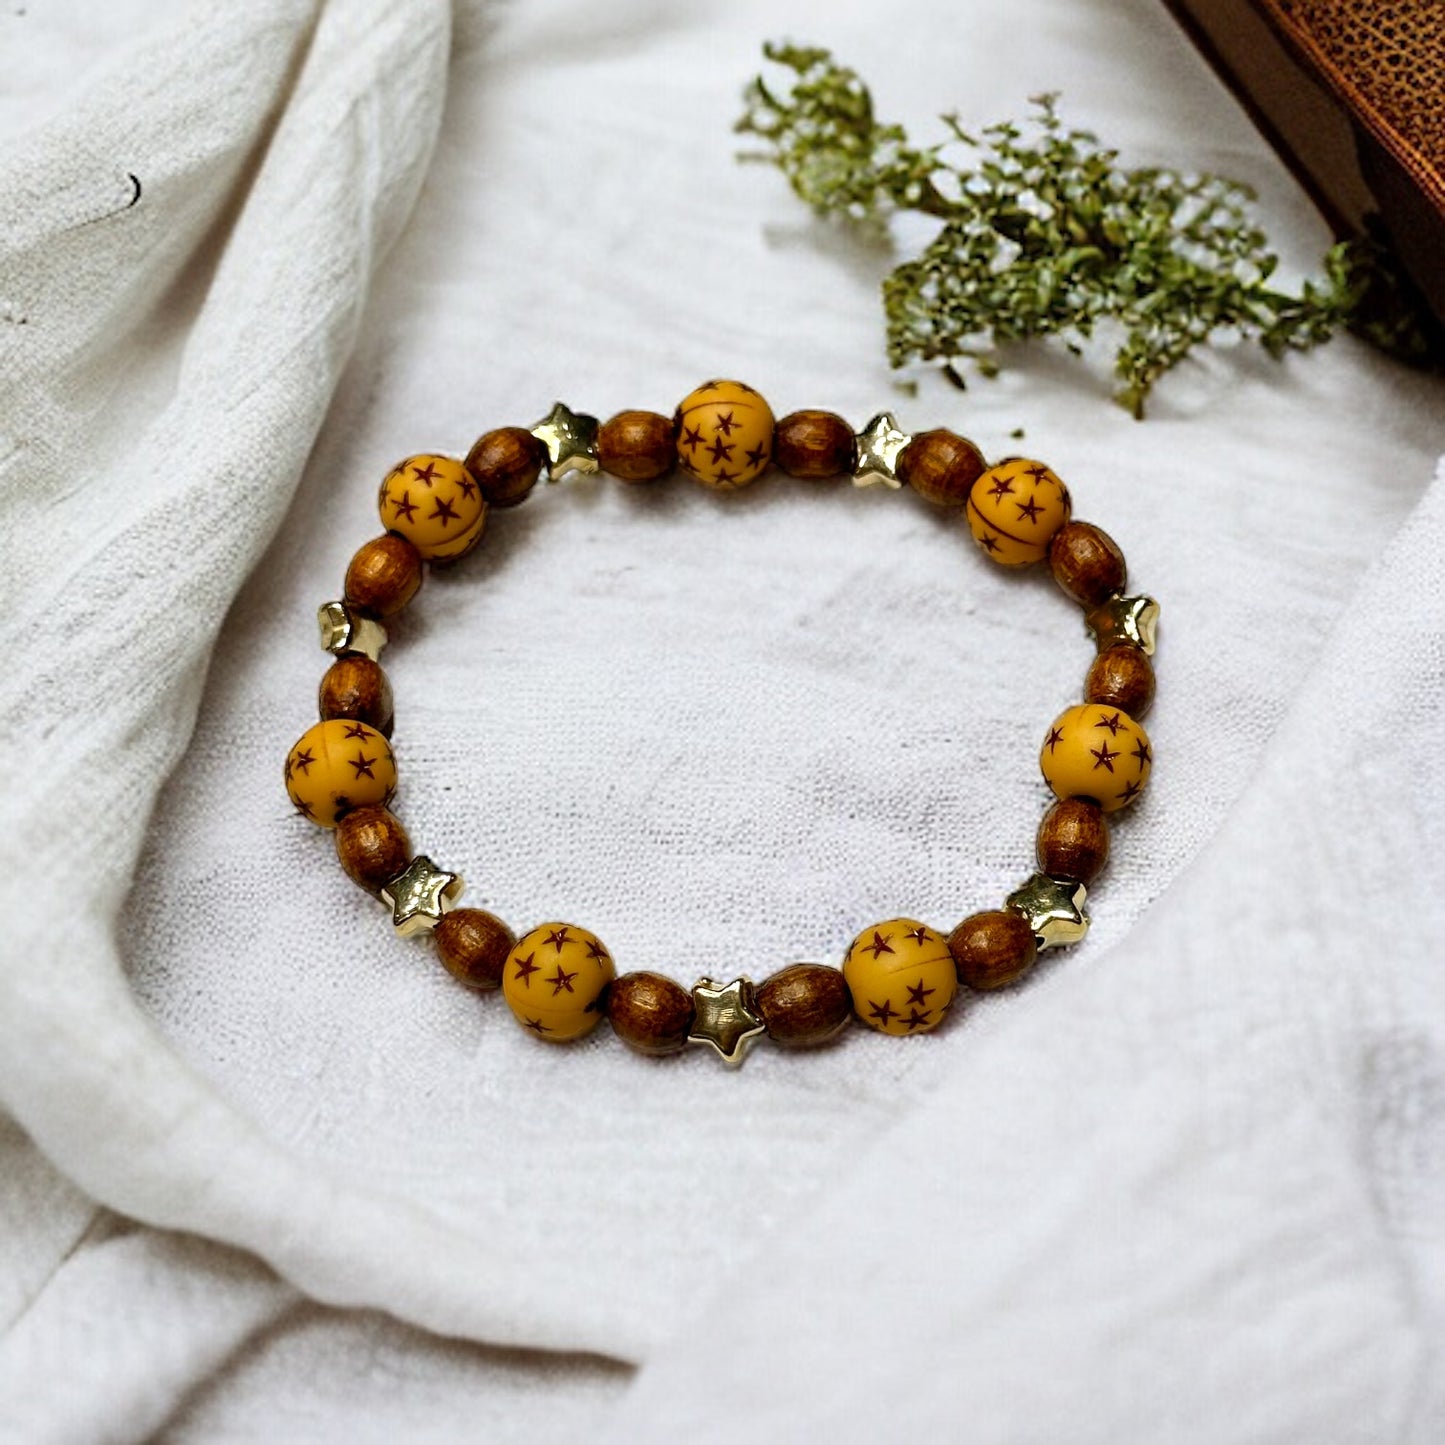 Wooden Beaded Stretch Bracelet with Star Accents